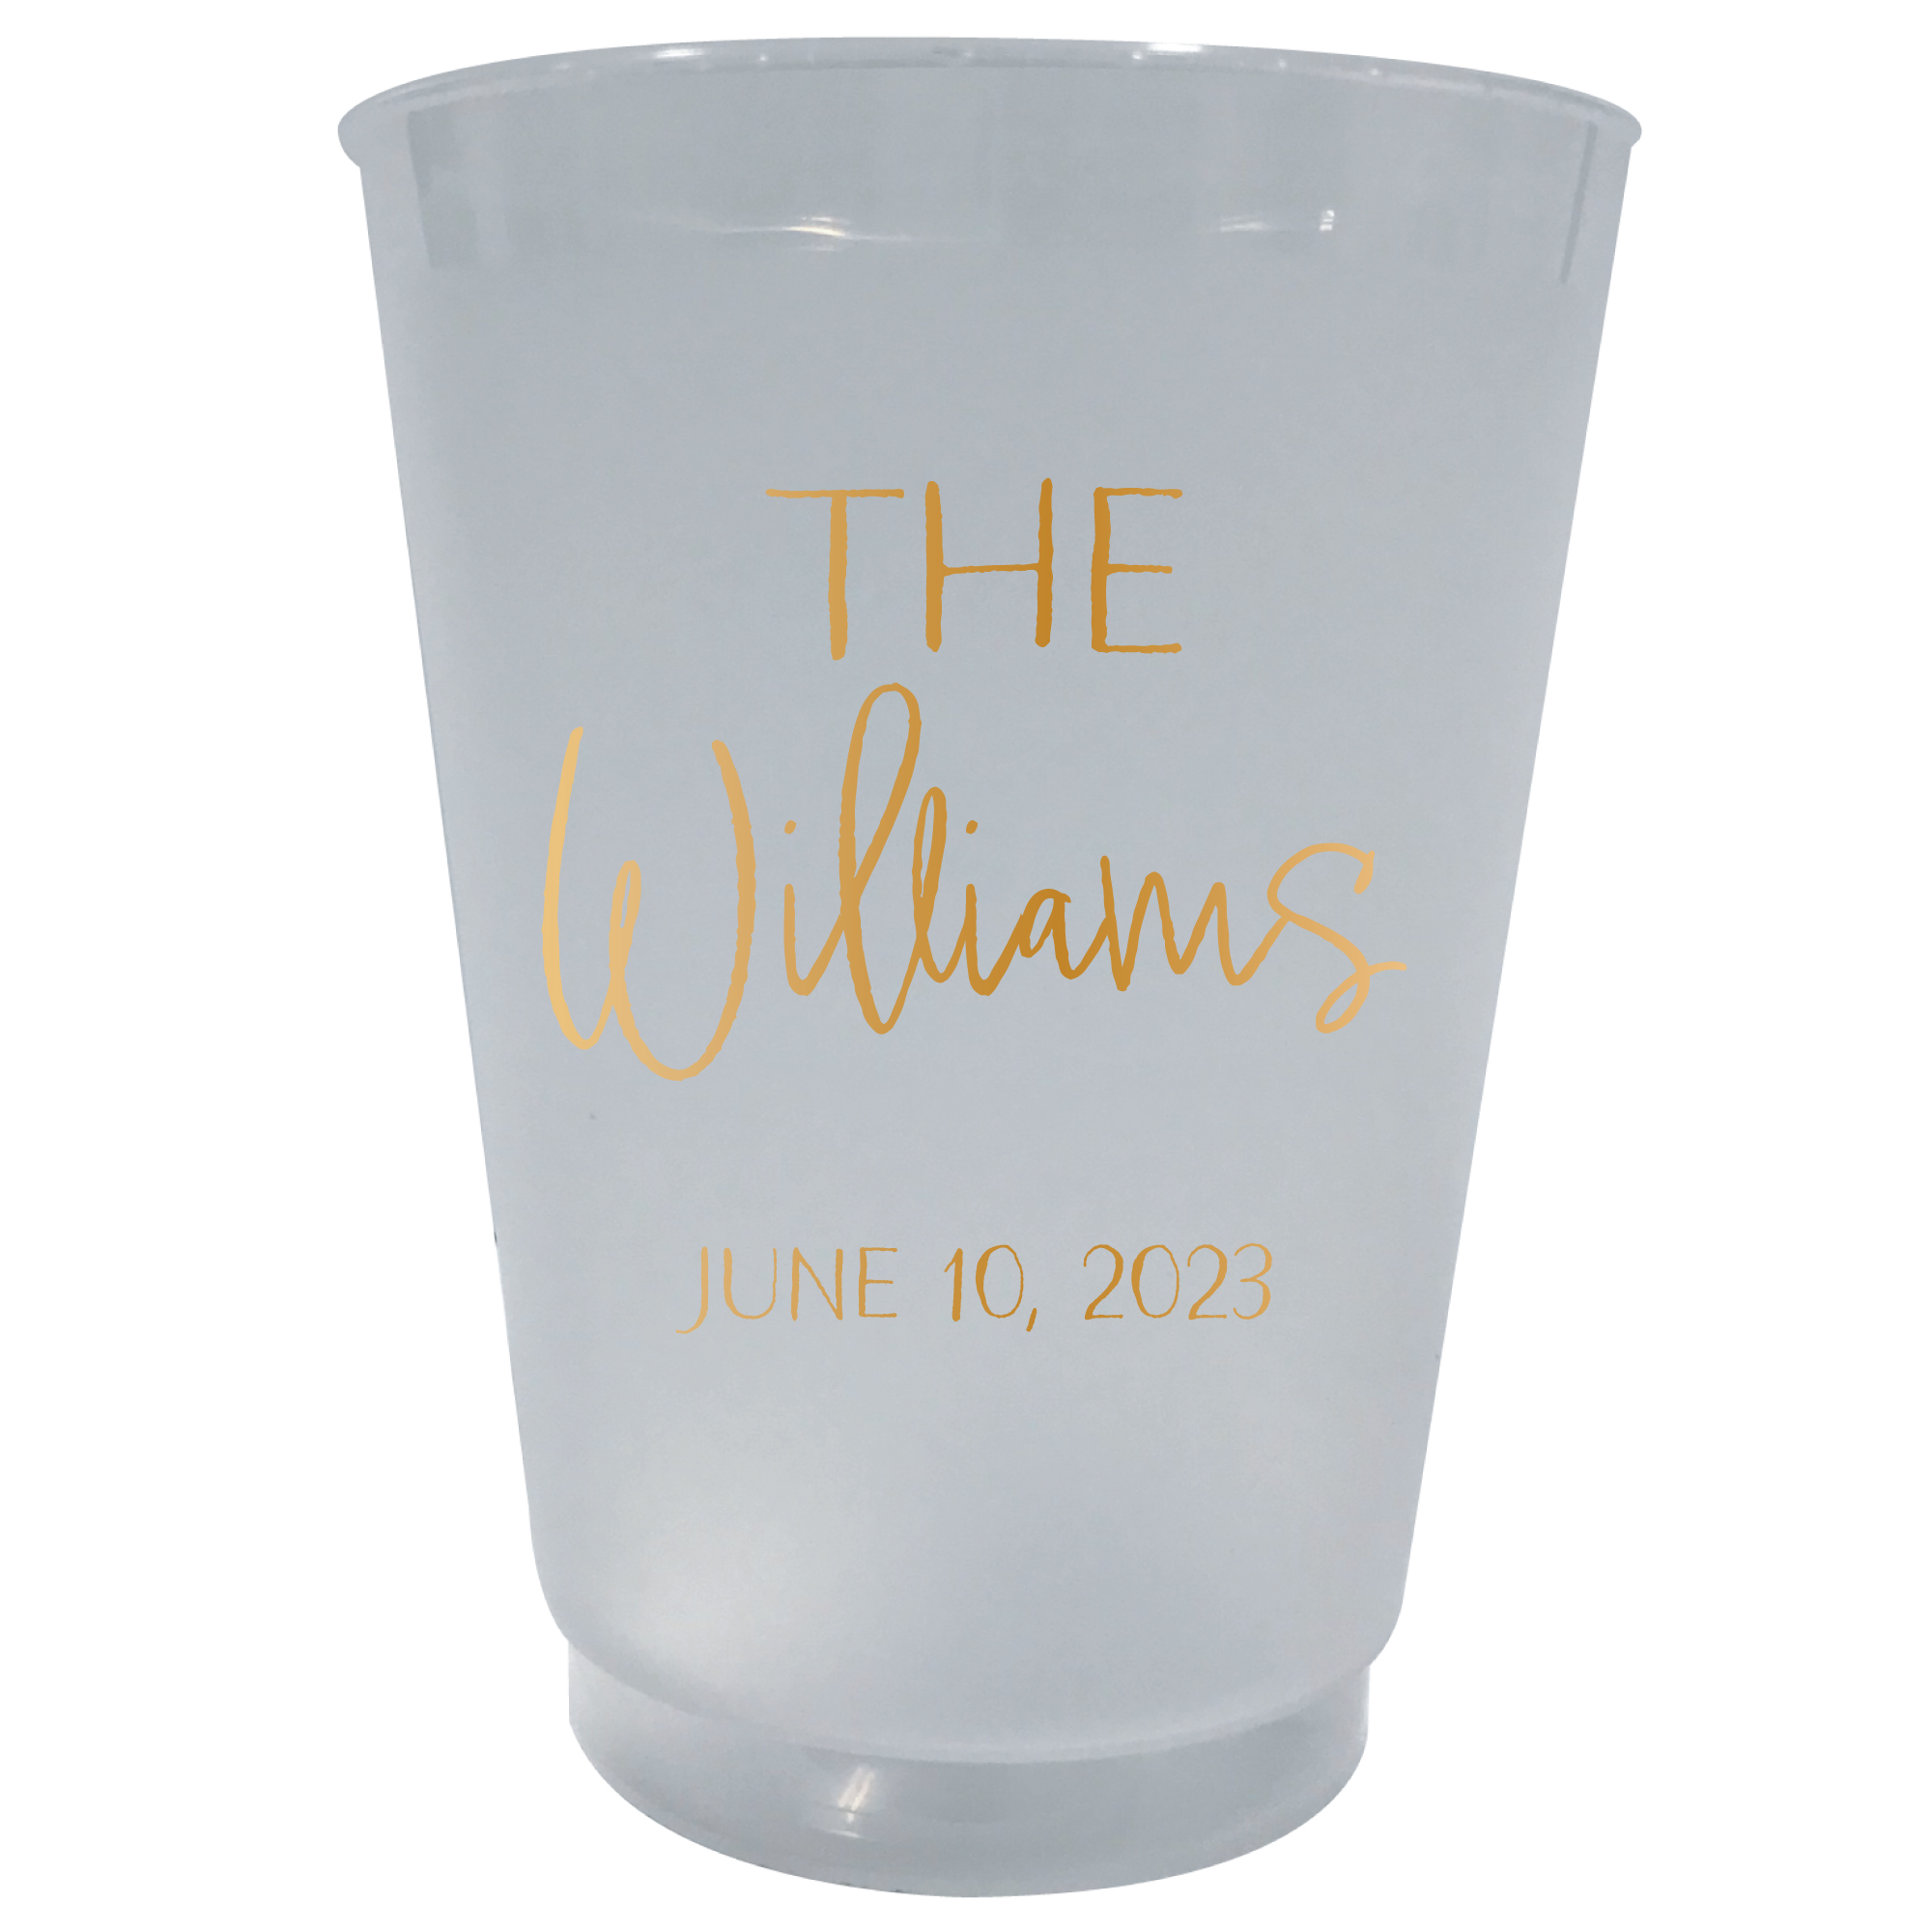 Custom Printed / Personalized Frosted Plastic Cups at Balloons